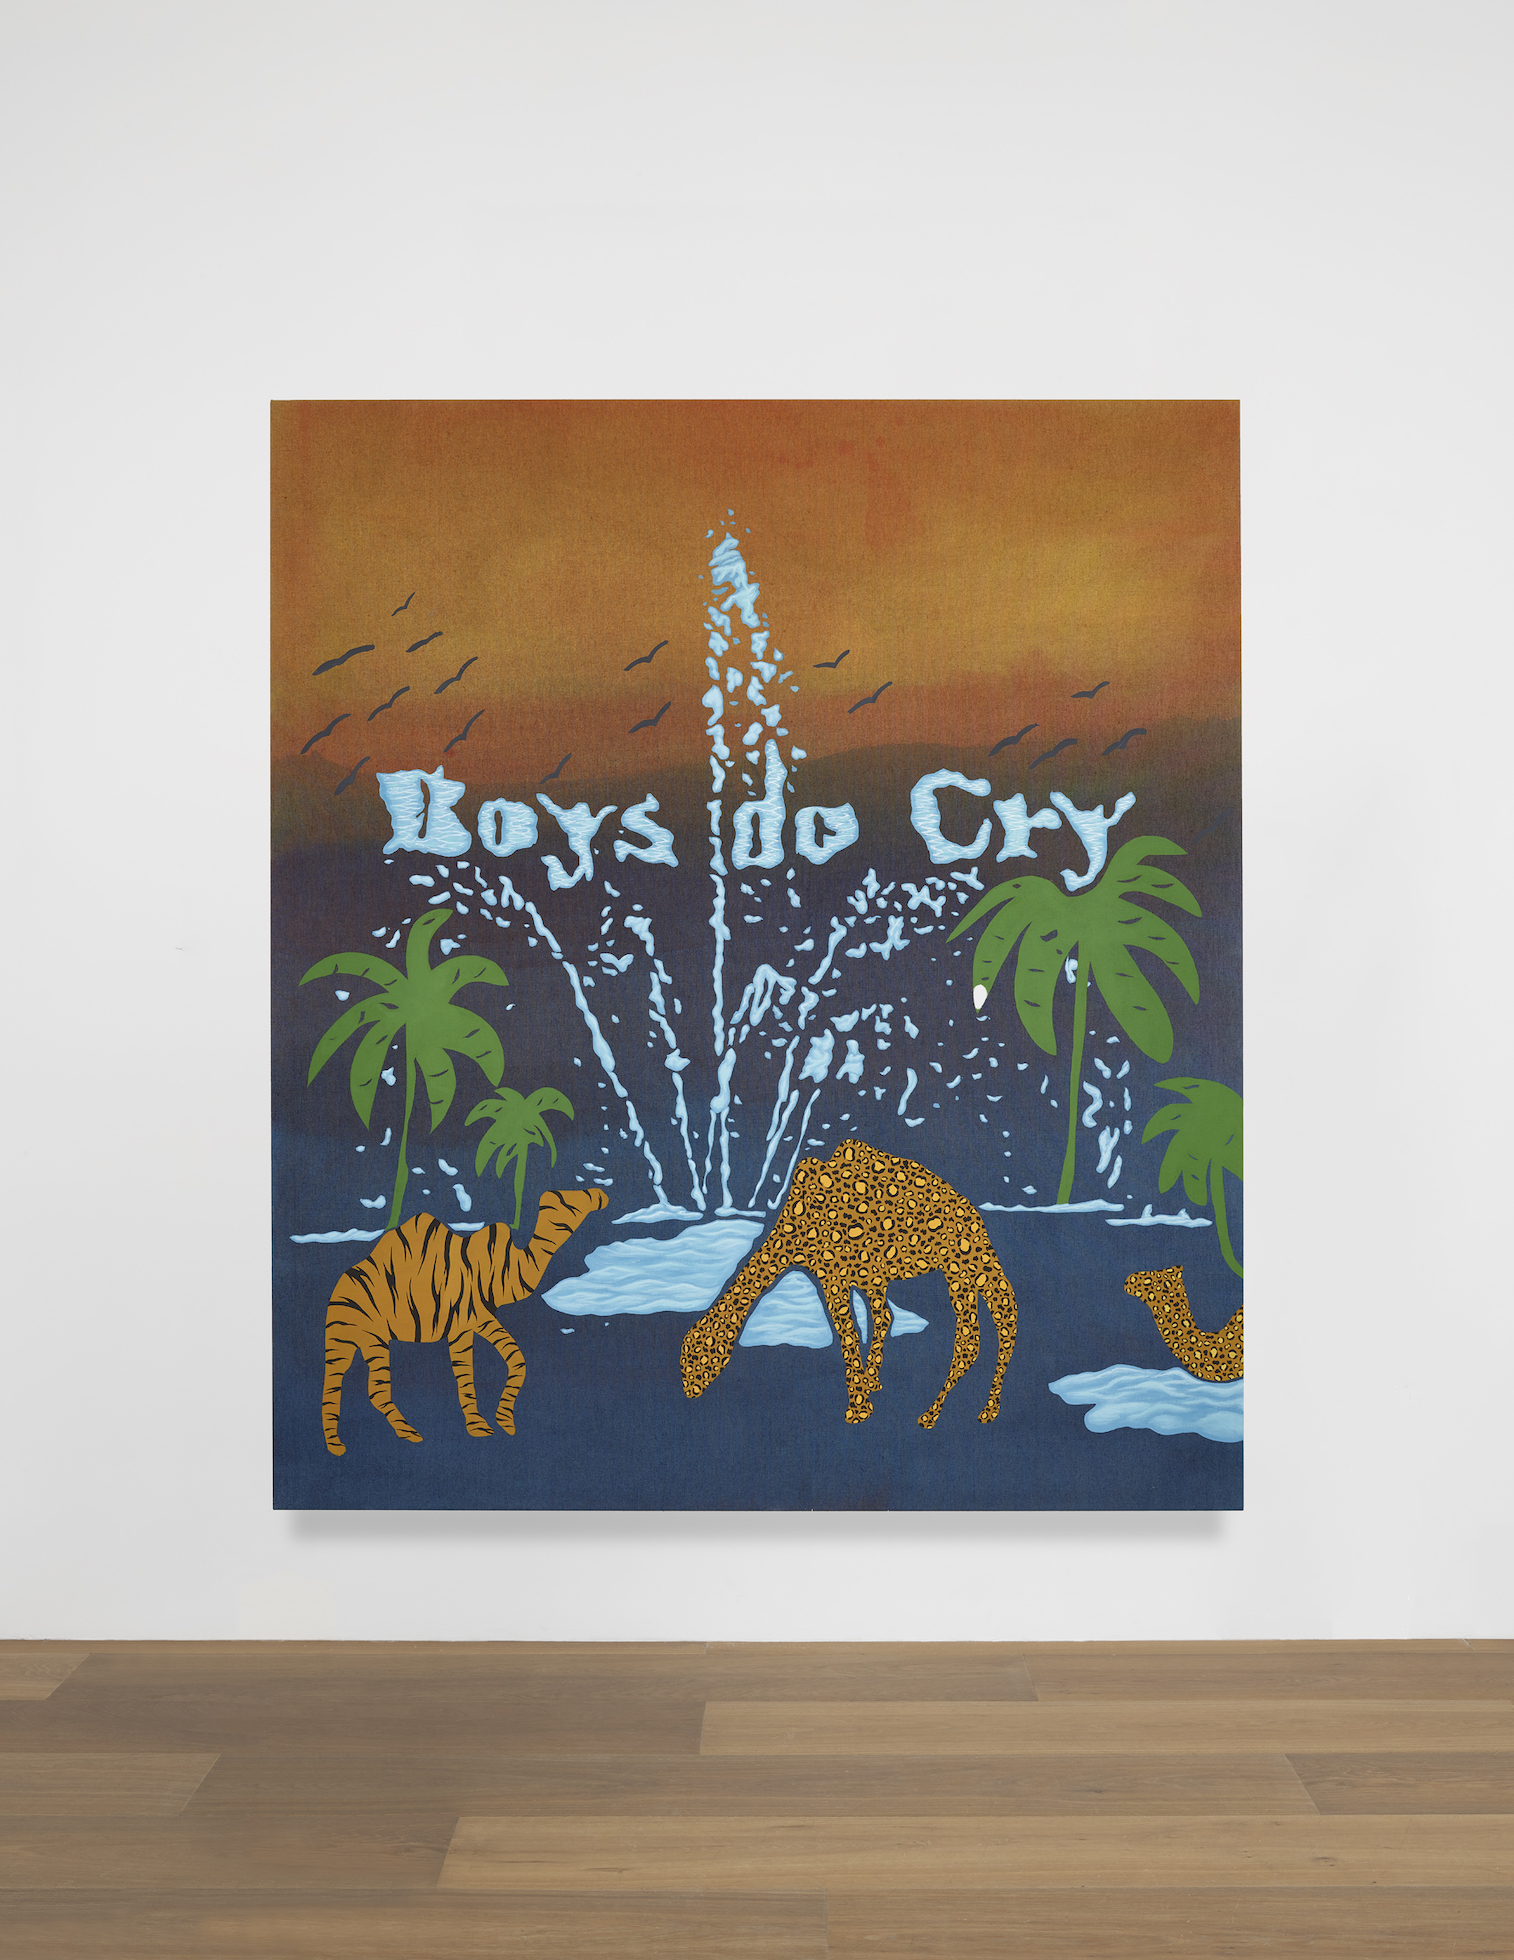 Installation view of Joel Mesler's painting Untitled (Boys Don't Cry)